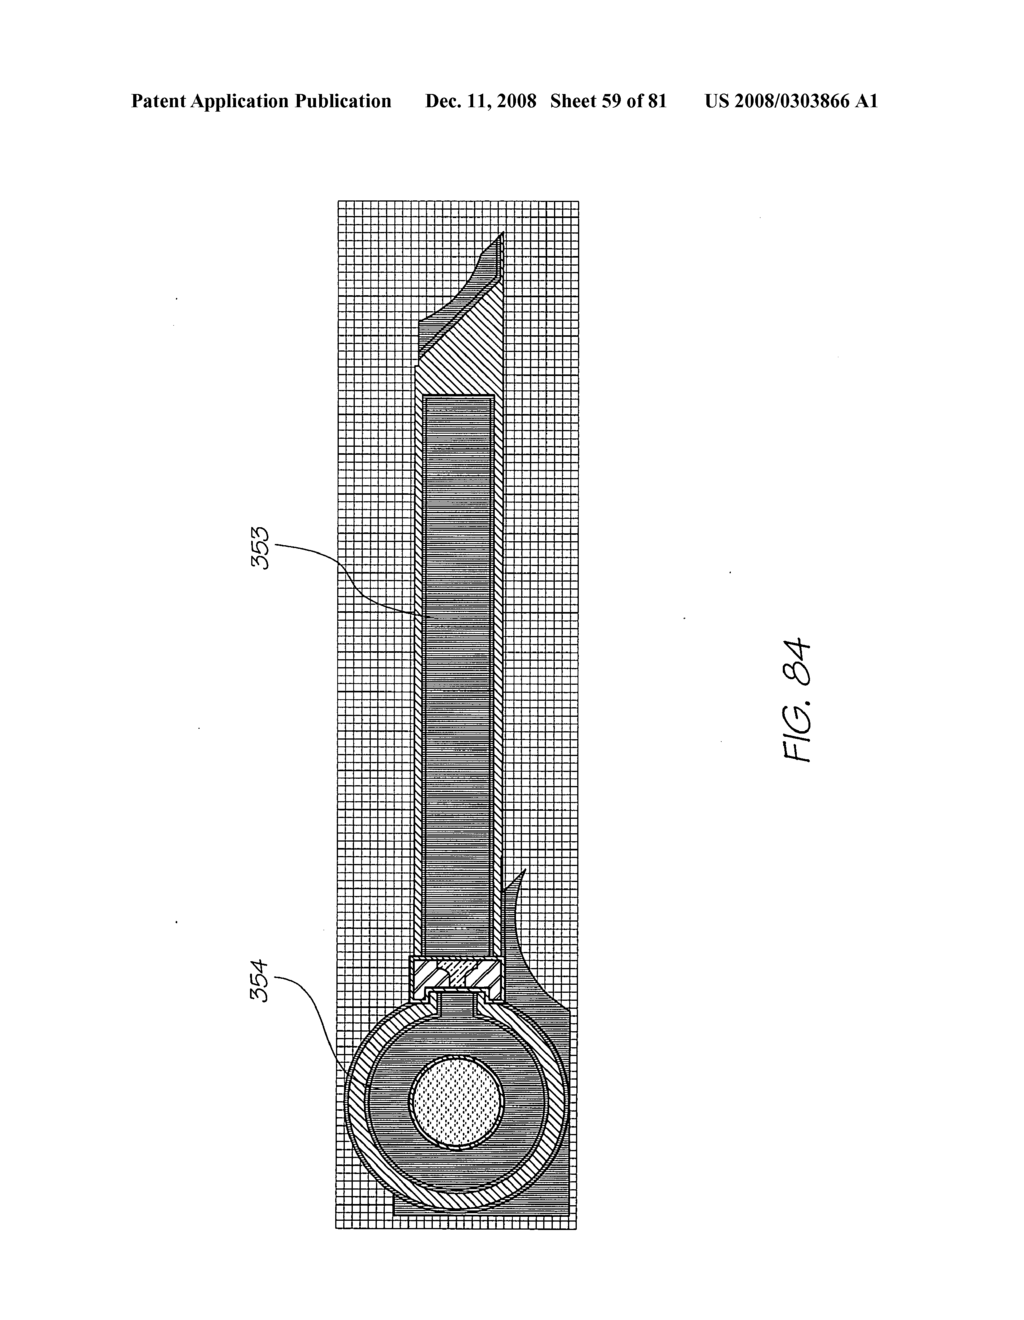 NOZZLE ASSEMBLY FOR AN INKJET PRINTER FOR EJECTING A LOW SPEED DROPLET - diagram, schematic, and image 60